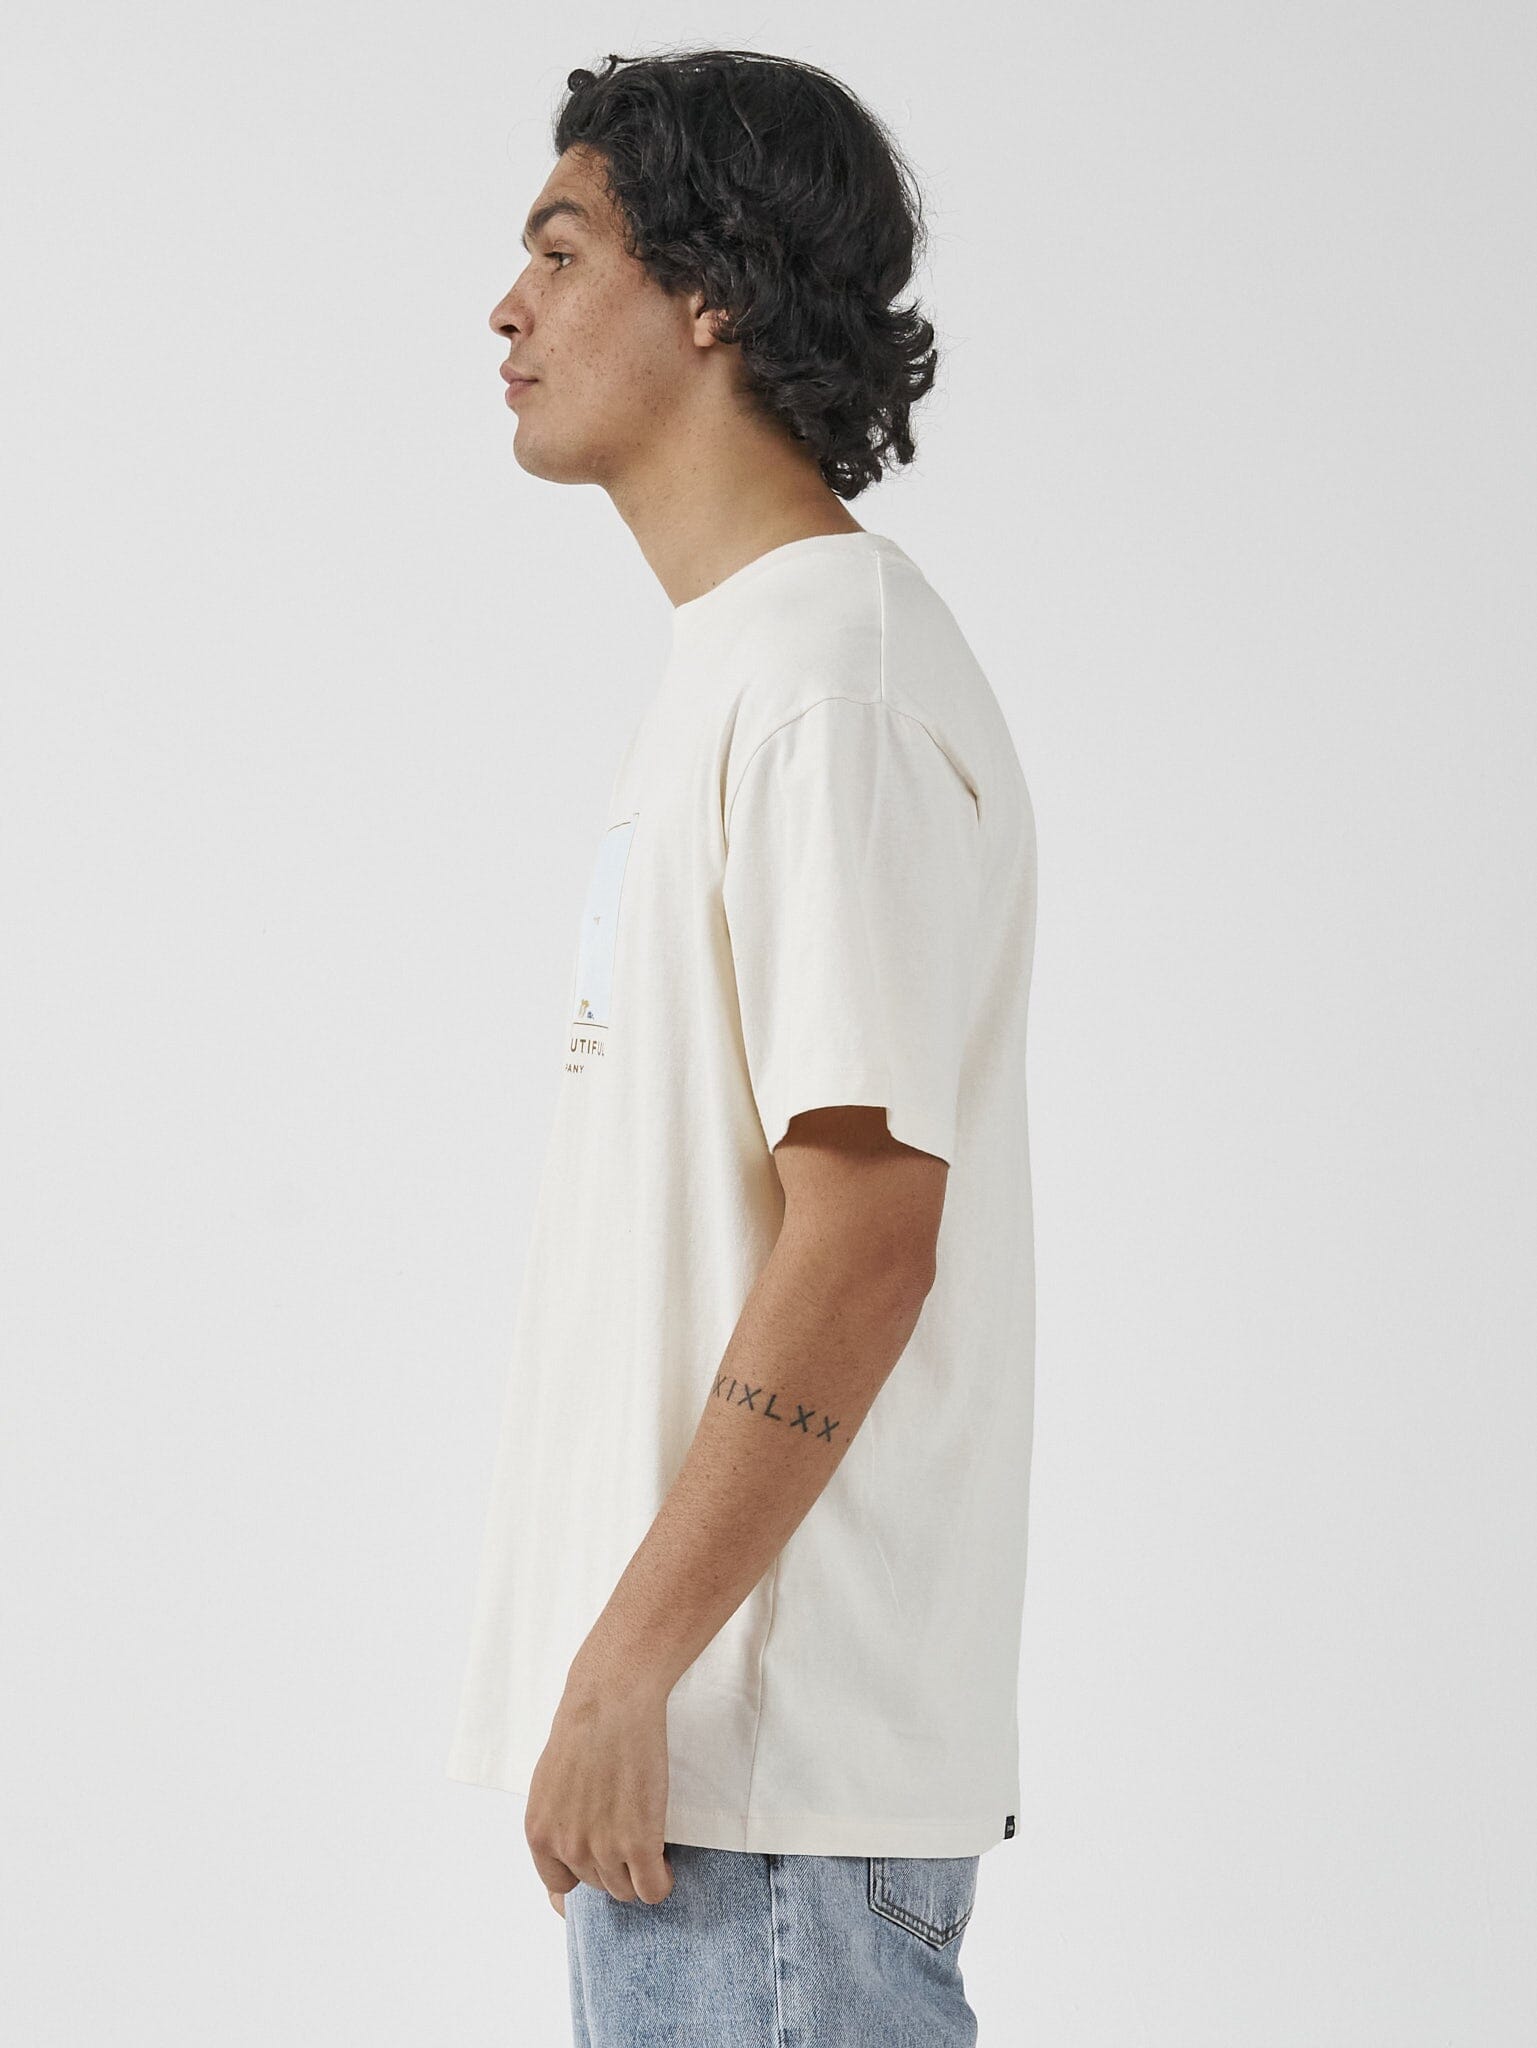 Deadly Beautiful Merch Fit Tee - Heritage White